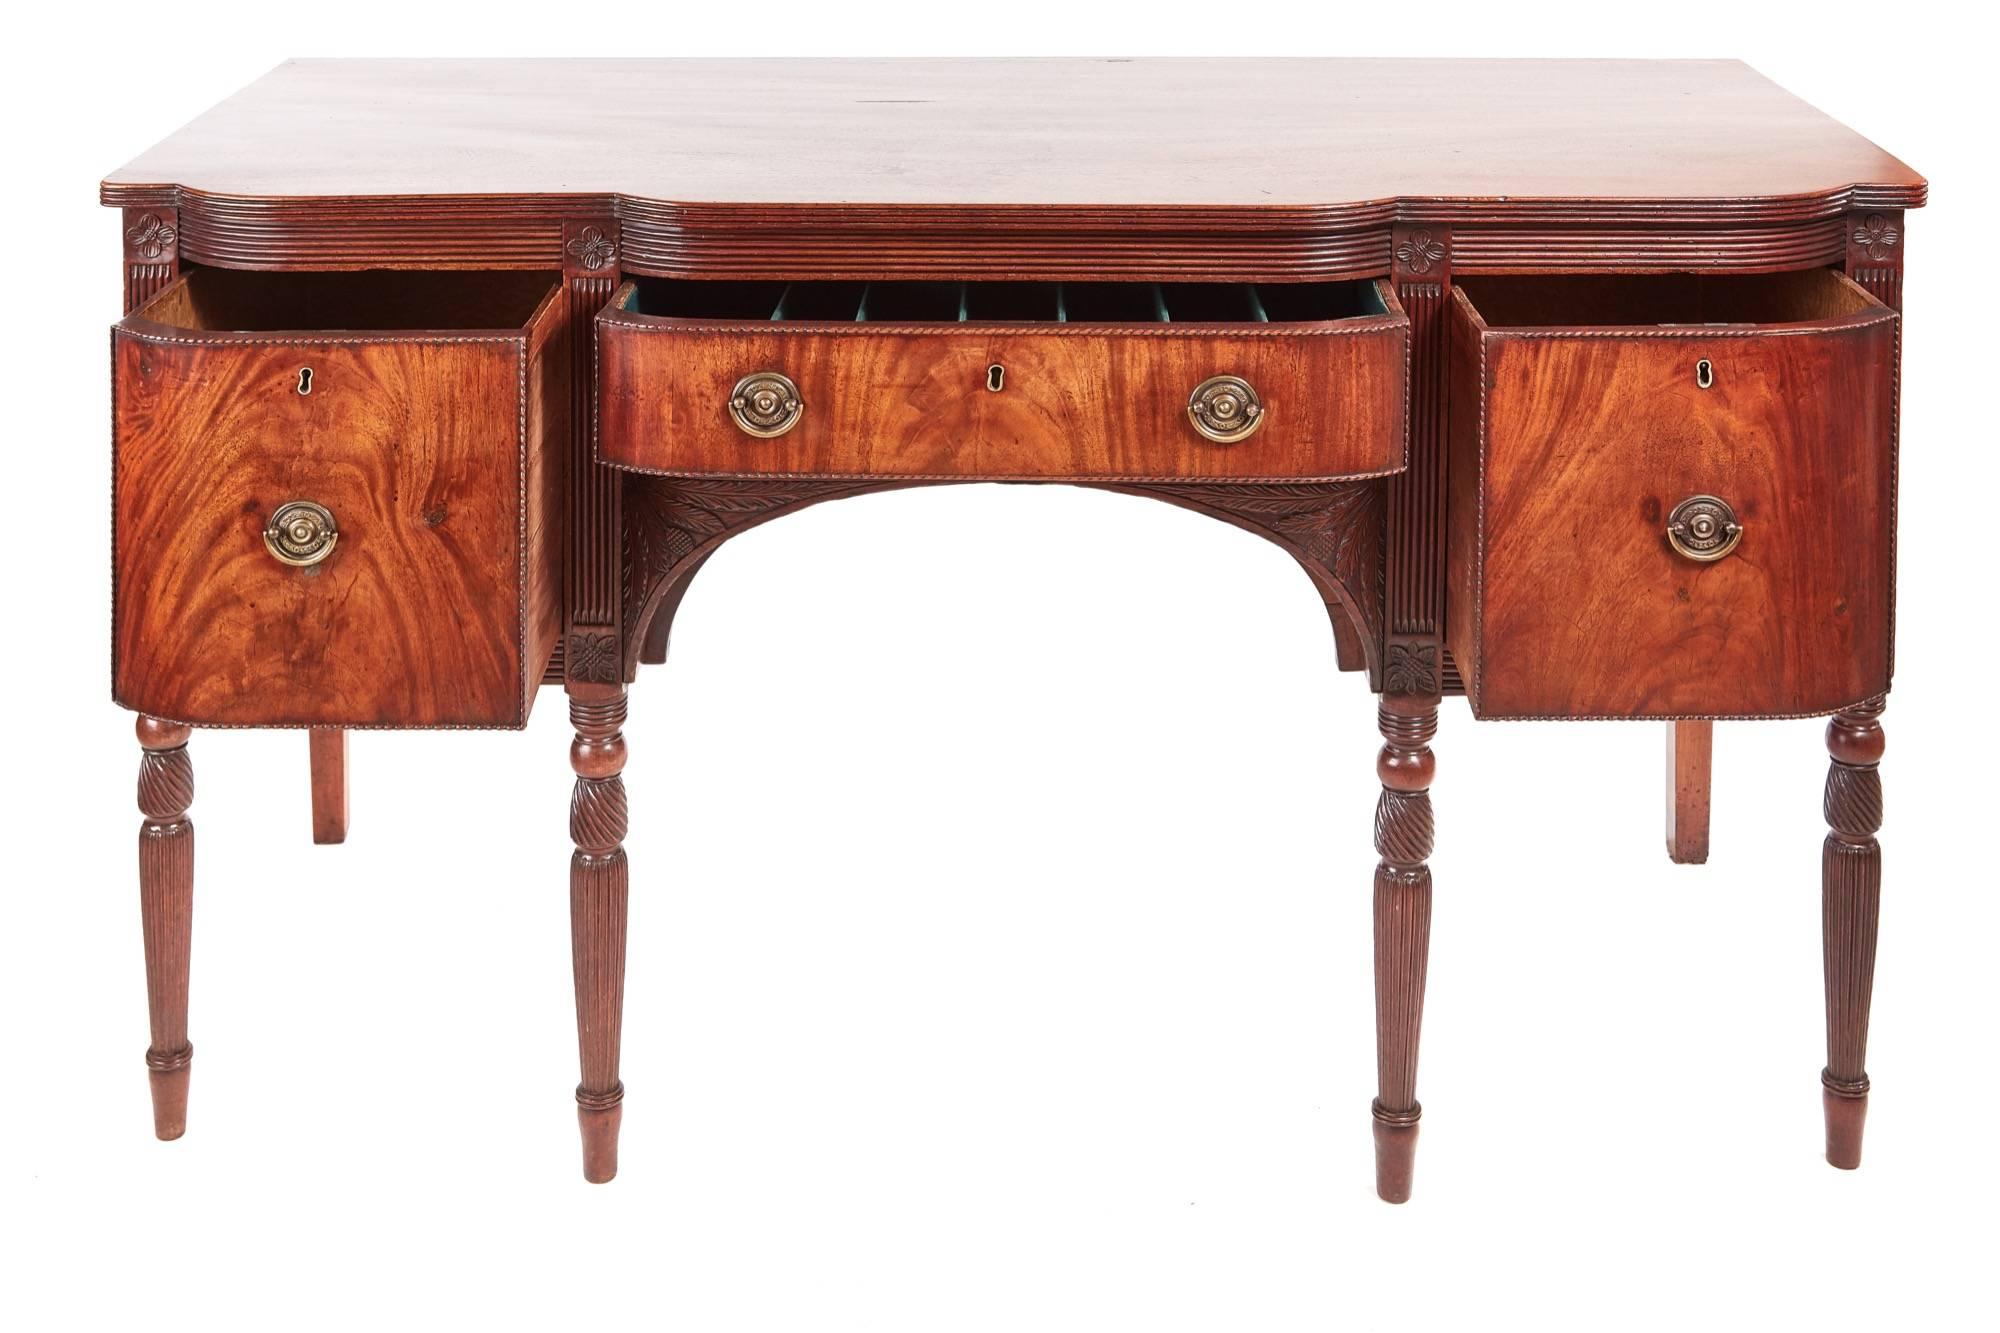 Quality mahogany Georgian sideboard, with a lovely mahogany top having a d-shaped reeded edge, two shaped drawers flanking a d-shaped central drawer all with original brass handles, thistle carving to the central supports, standing on carved reeded